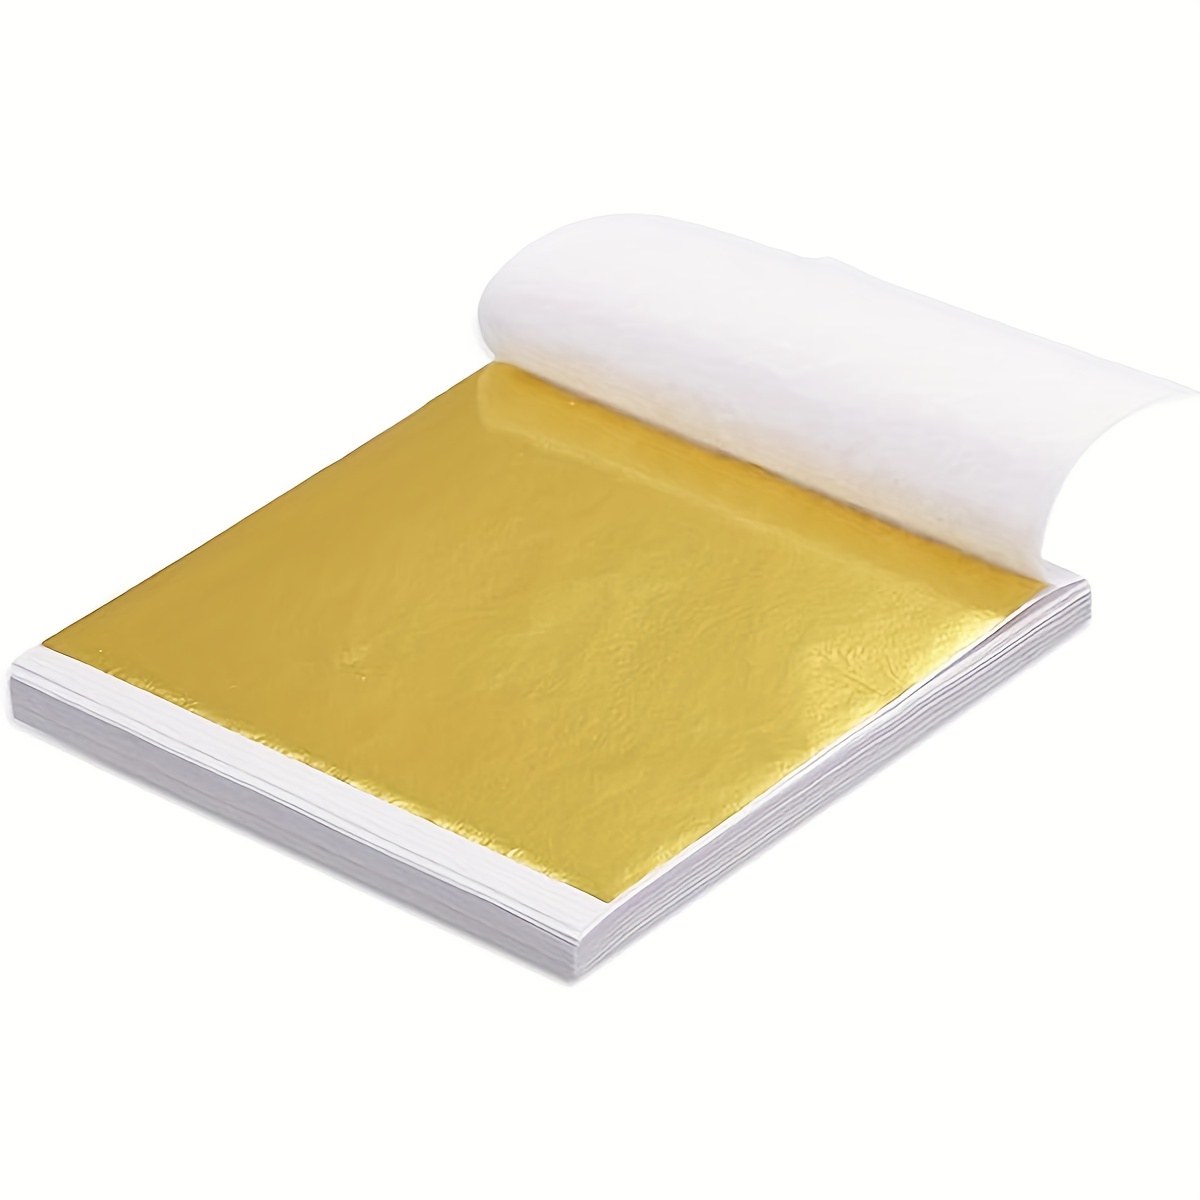 24K Pure Gold Leaf Edible Gold Foil Sheets for Cake Decoration Arts Crafts  Paper Painting Skin Care Home Real Gold Foil Gilding - AliExpress